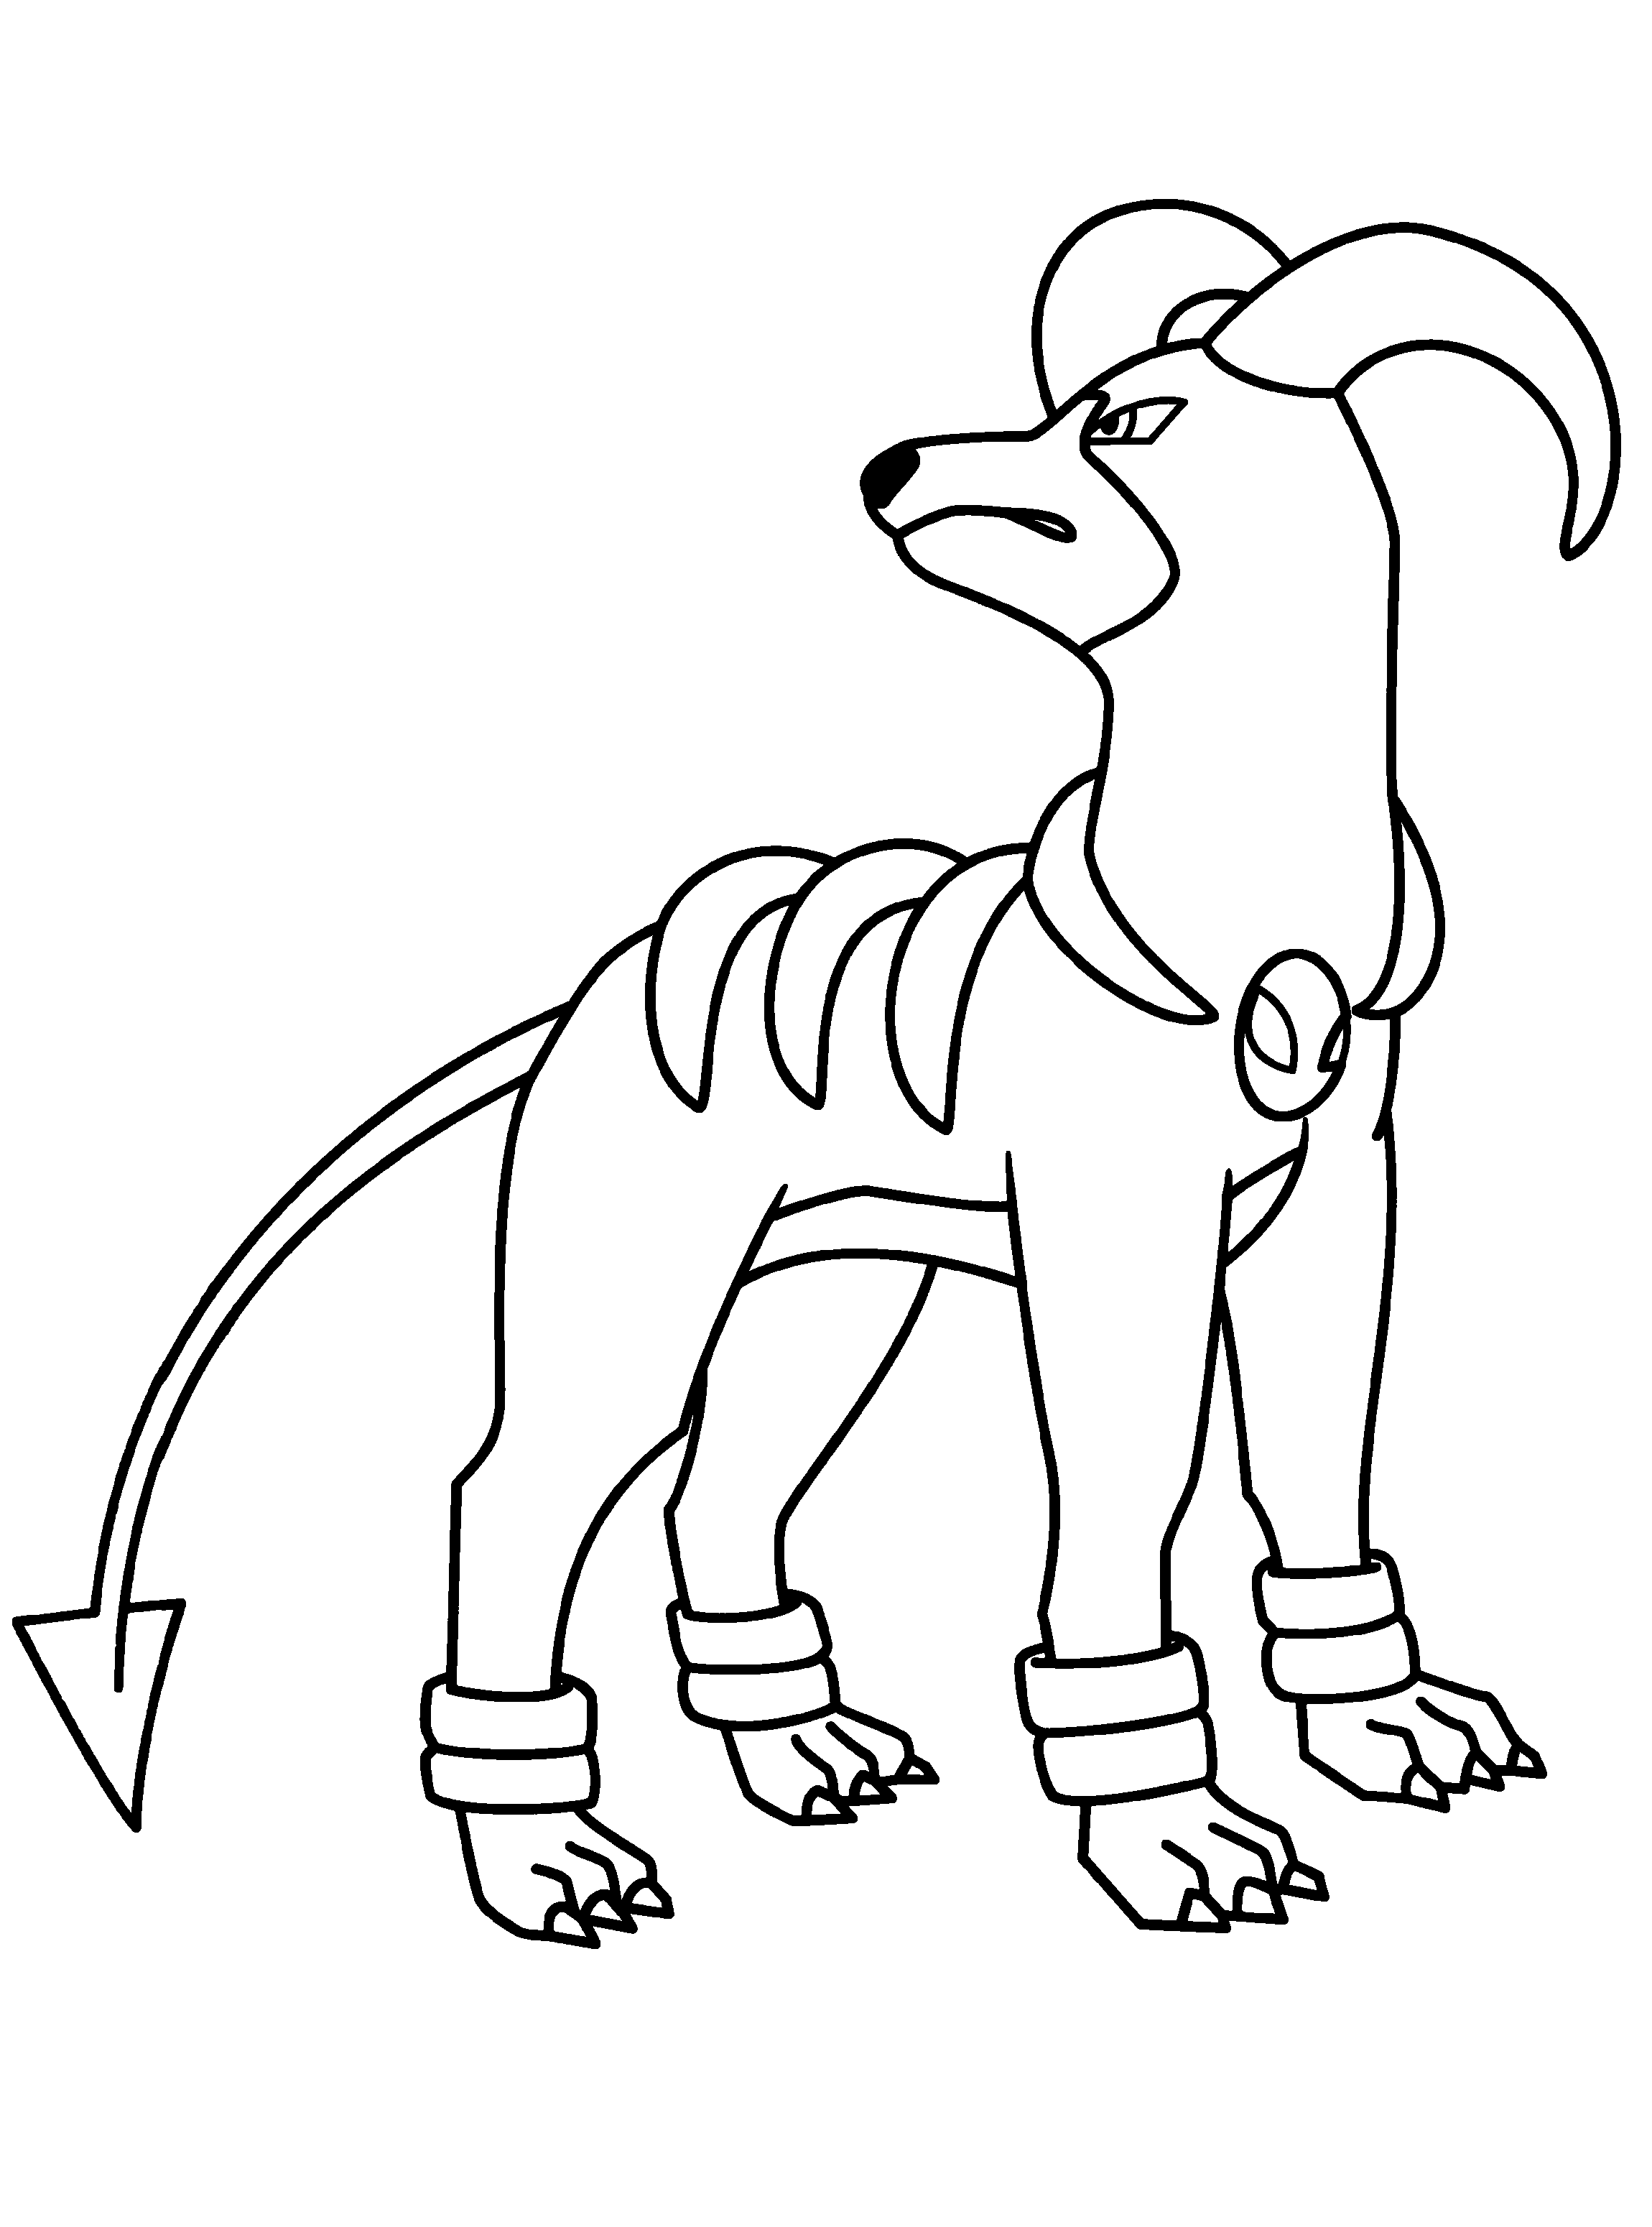 pokemon-coloring-pages-black-and-white-i2.gif